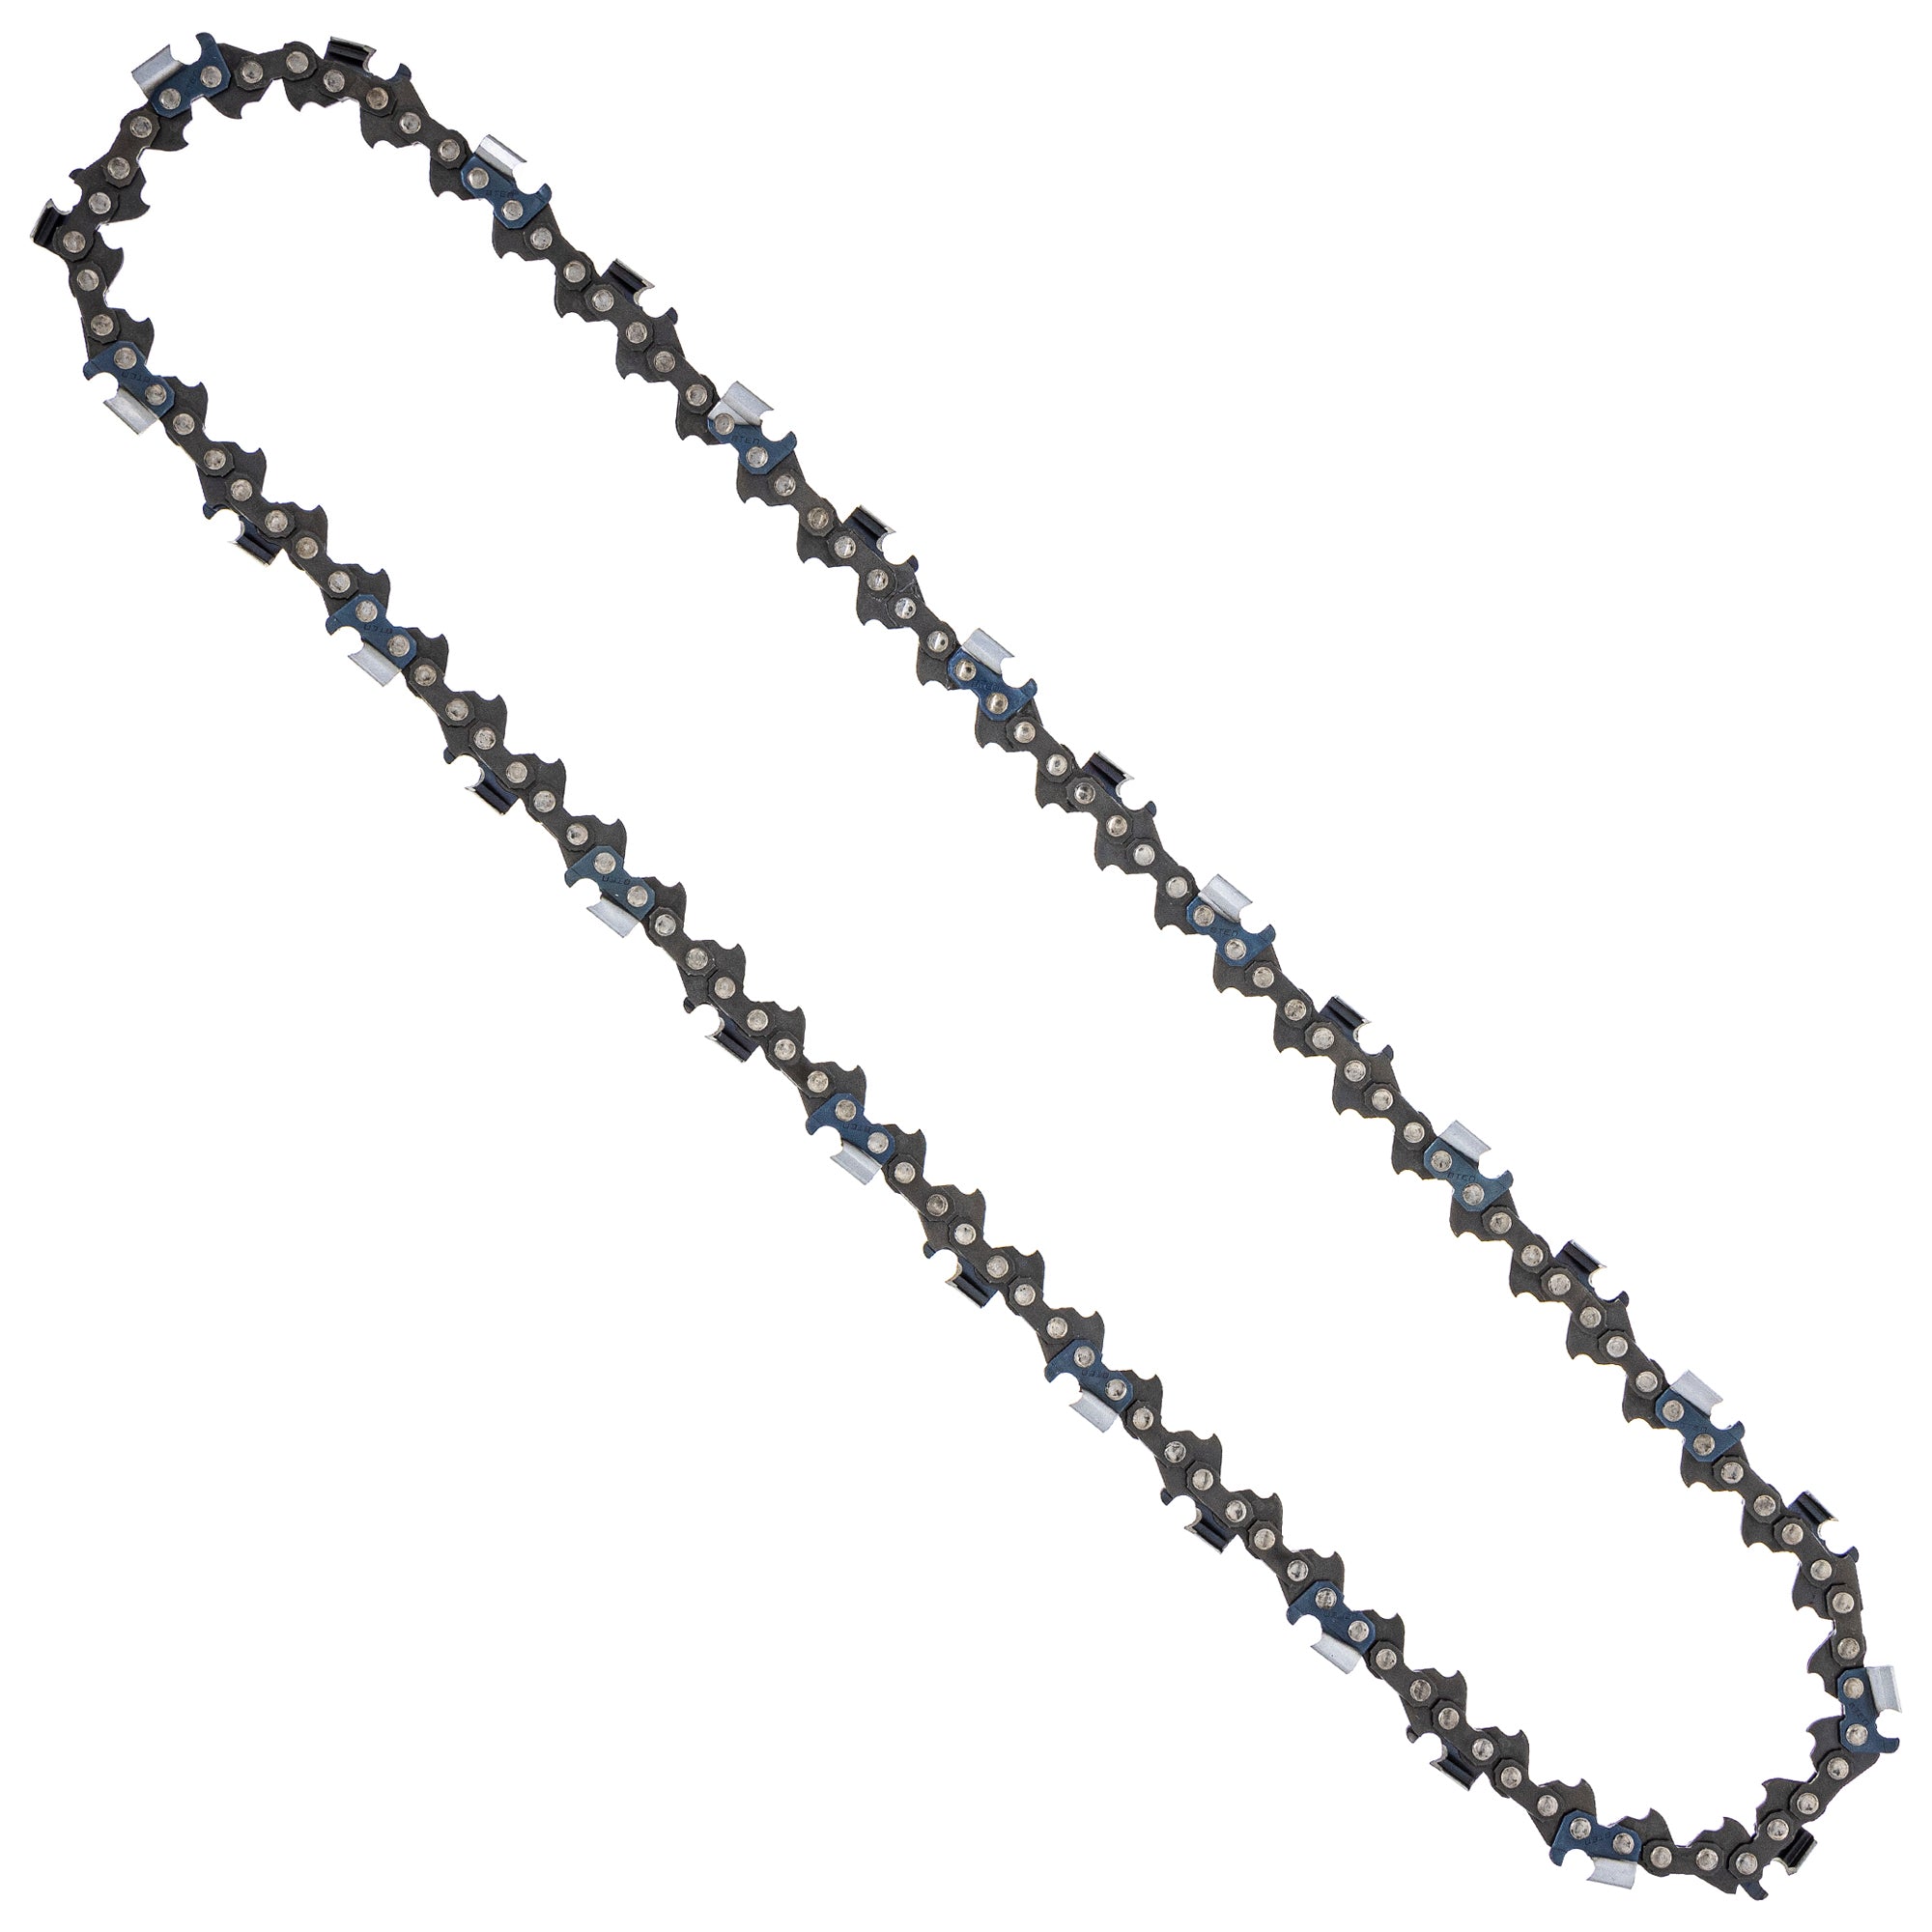 8TEN 810-CCC2316H Chain 3-Pack for zOTHER Oregon Husqvarna Poulan